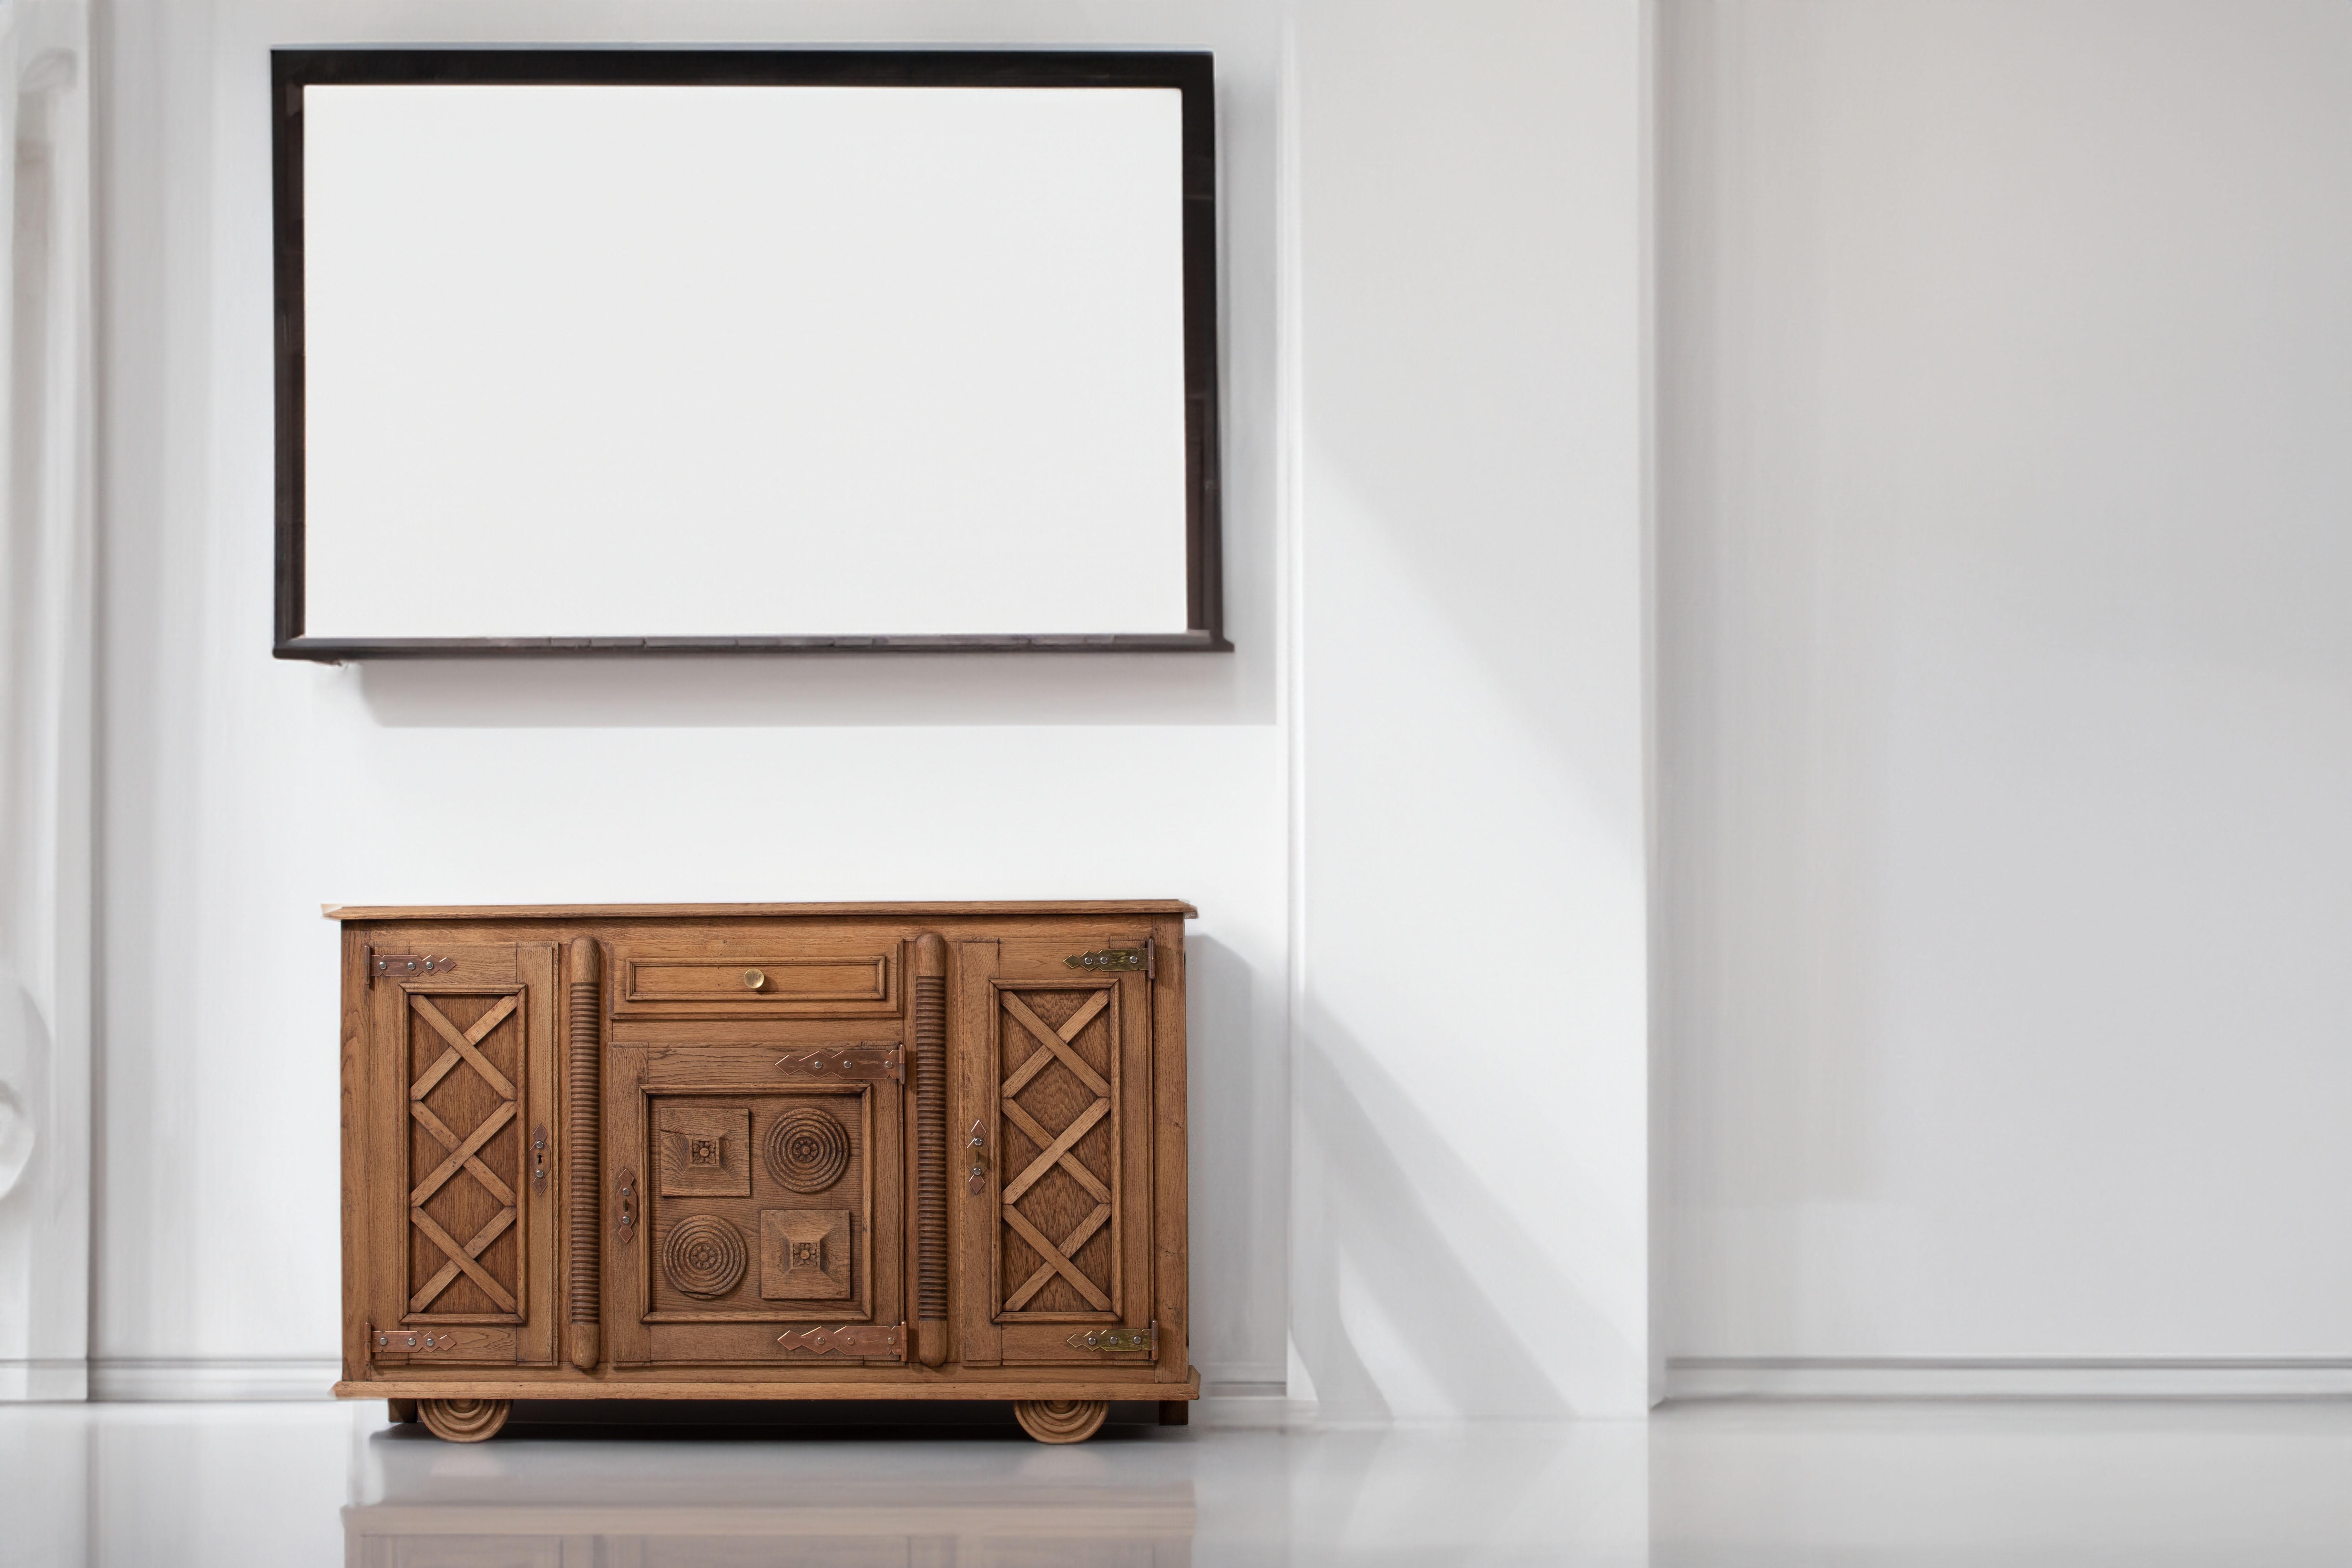 Exquisite French Oak Credenza: A Testament to Charles Dudouyt's Artistry

Immerse yourself in the timeless allure of this French oak credenza, masterfully crafted by the renowned designer Charles Dudouyt in the 1940s. A true embodiment of Art Deco